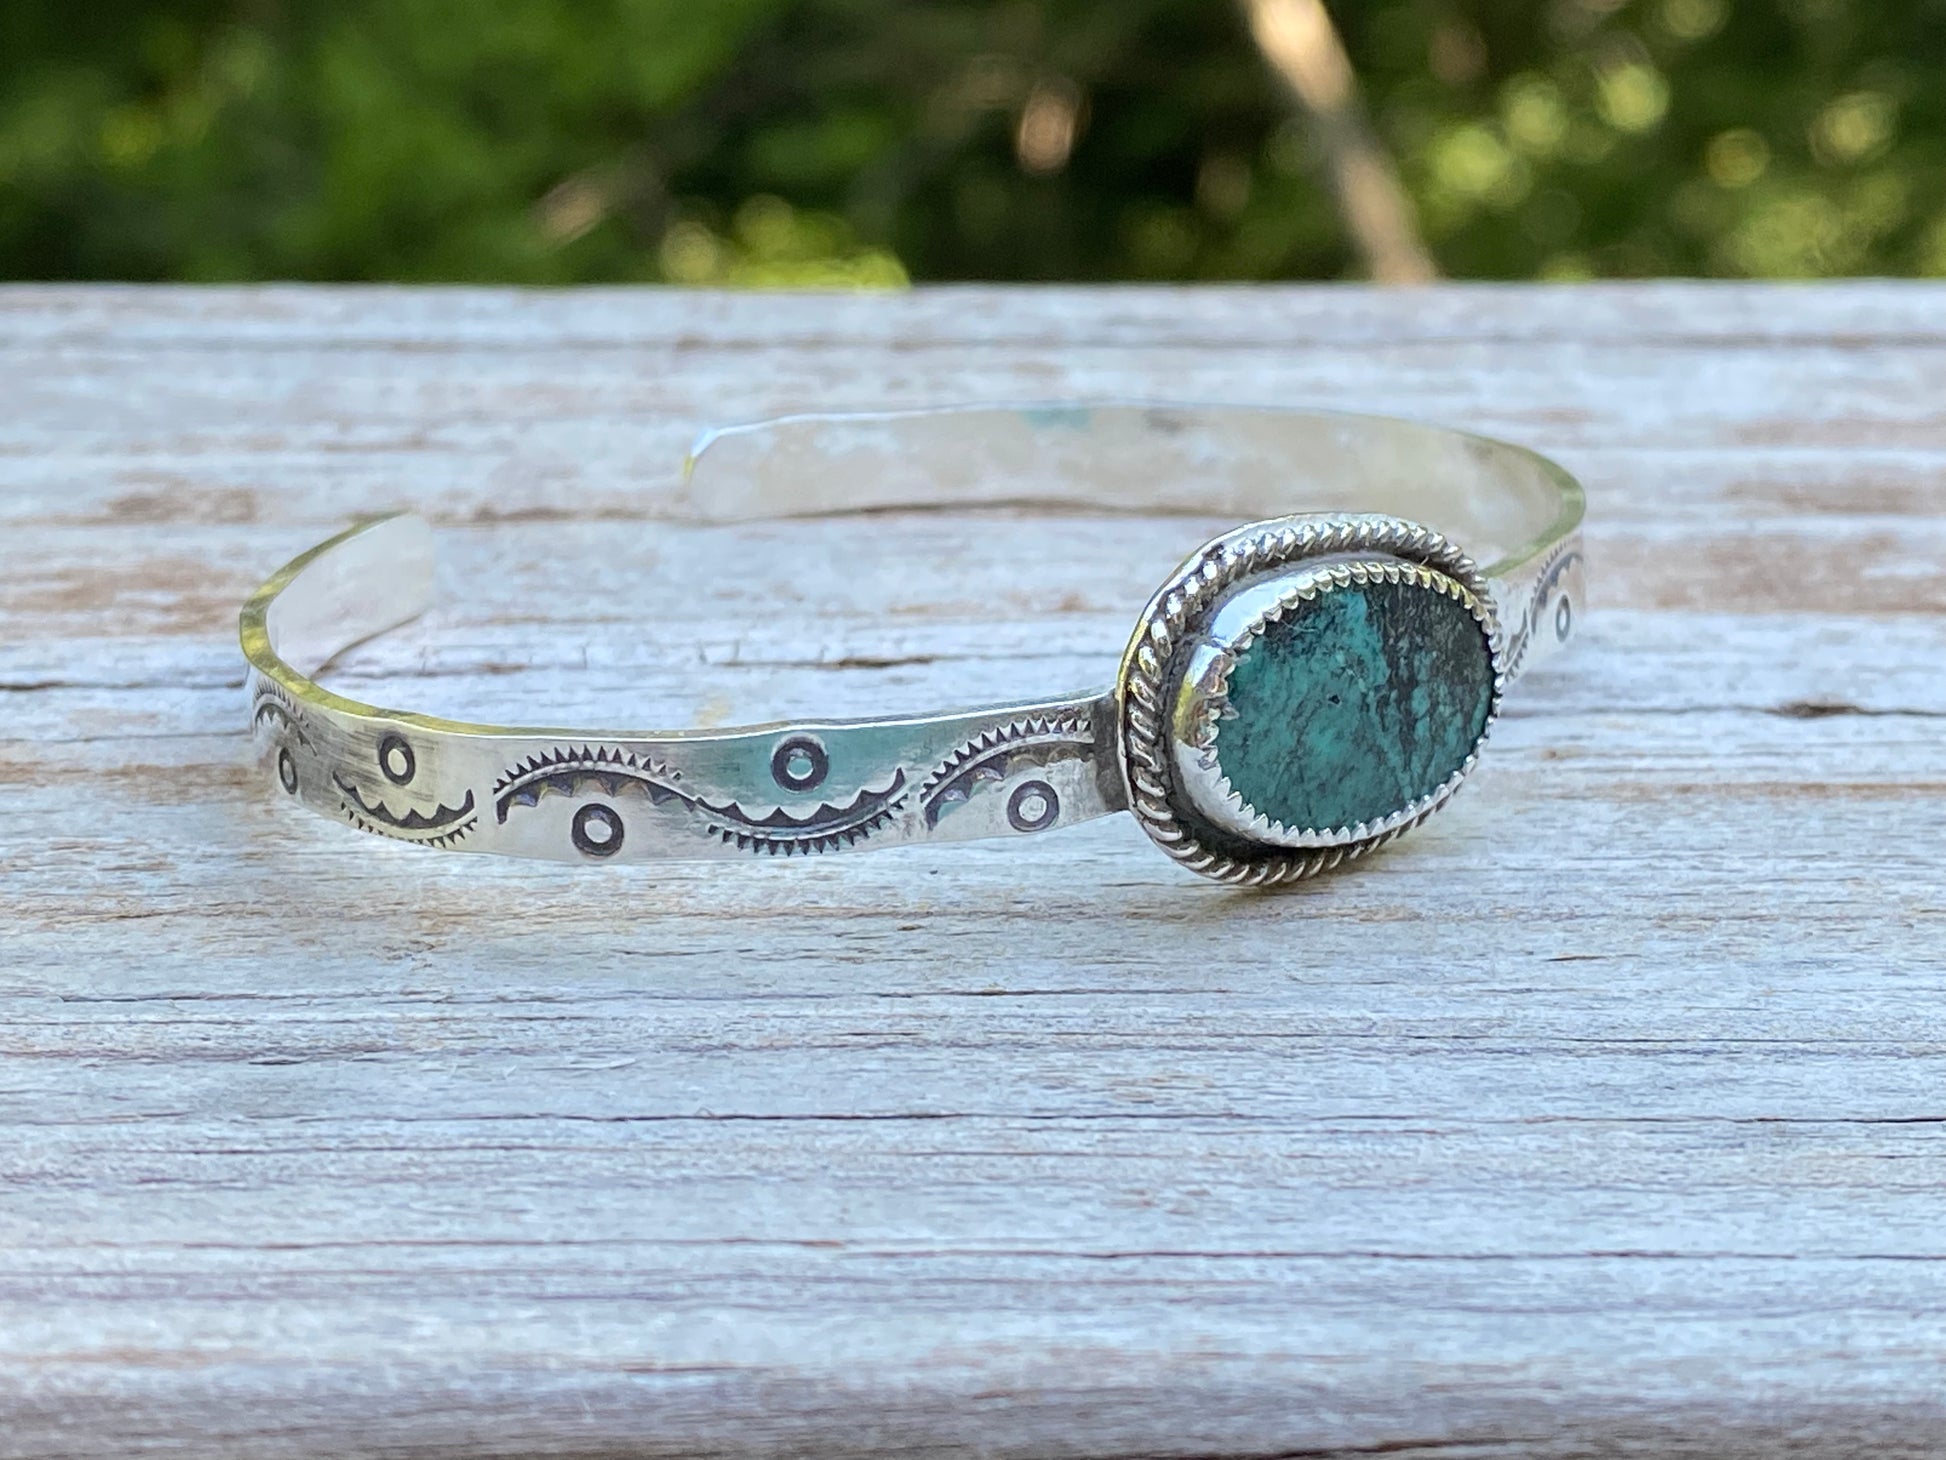 Turquoise bangles - collectionsbytracy.com